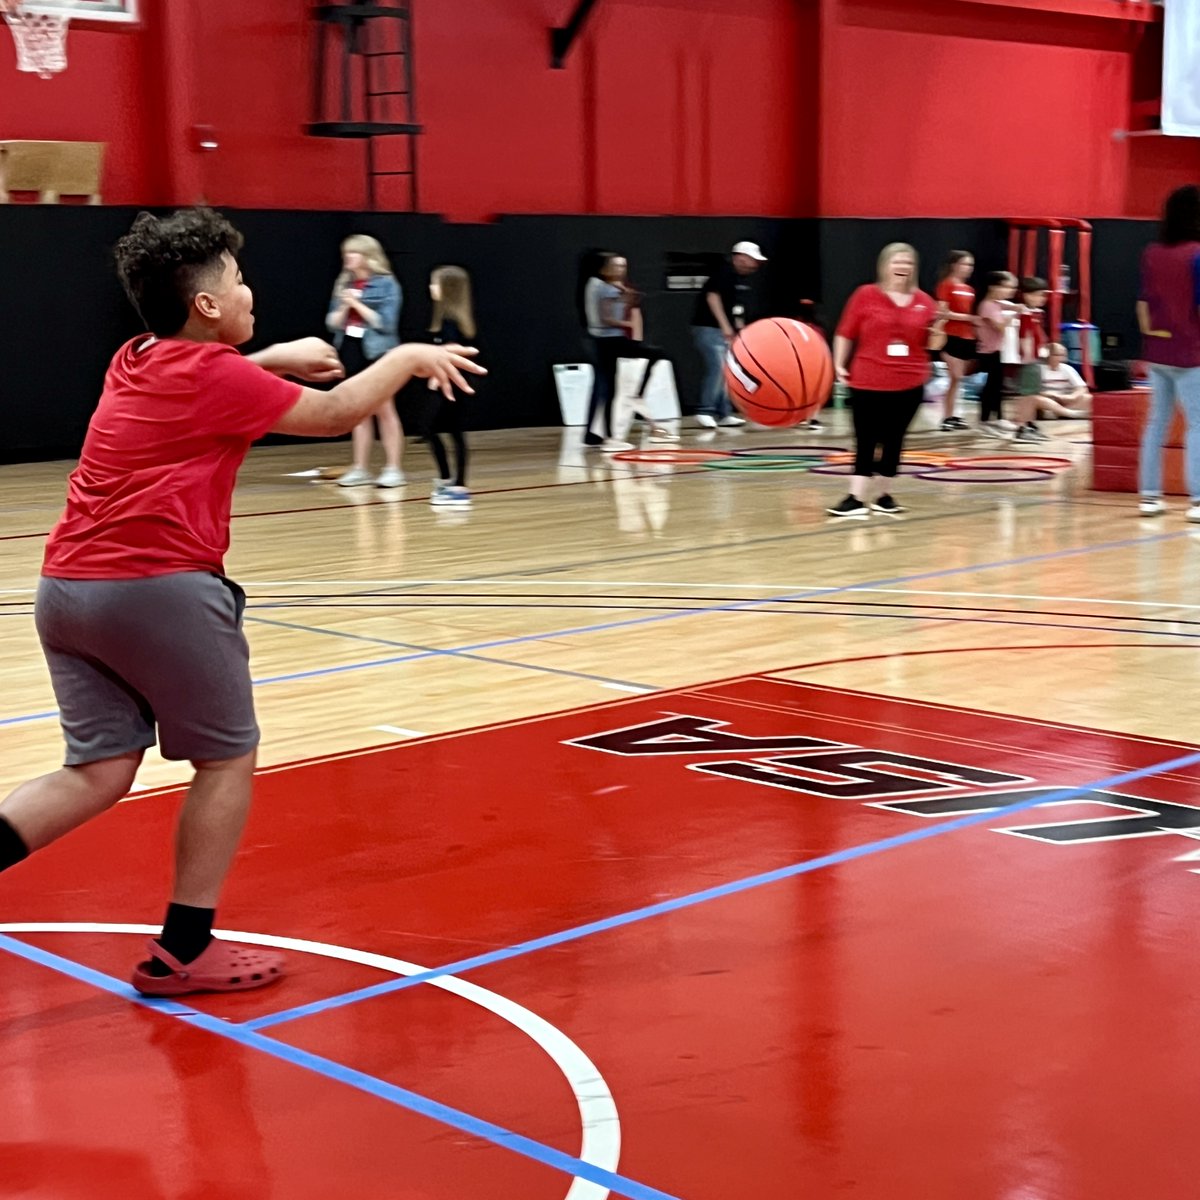 WKU Take Your Kids to Work Day!🌟🏀 Today, we played games to level up our leadership skills, sweat it out with some exercise, and crush it with teamwork! Lots of energy as we rotated through different stations with the WKU School of Kinesiology, Recreation and Sport! 💪